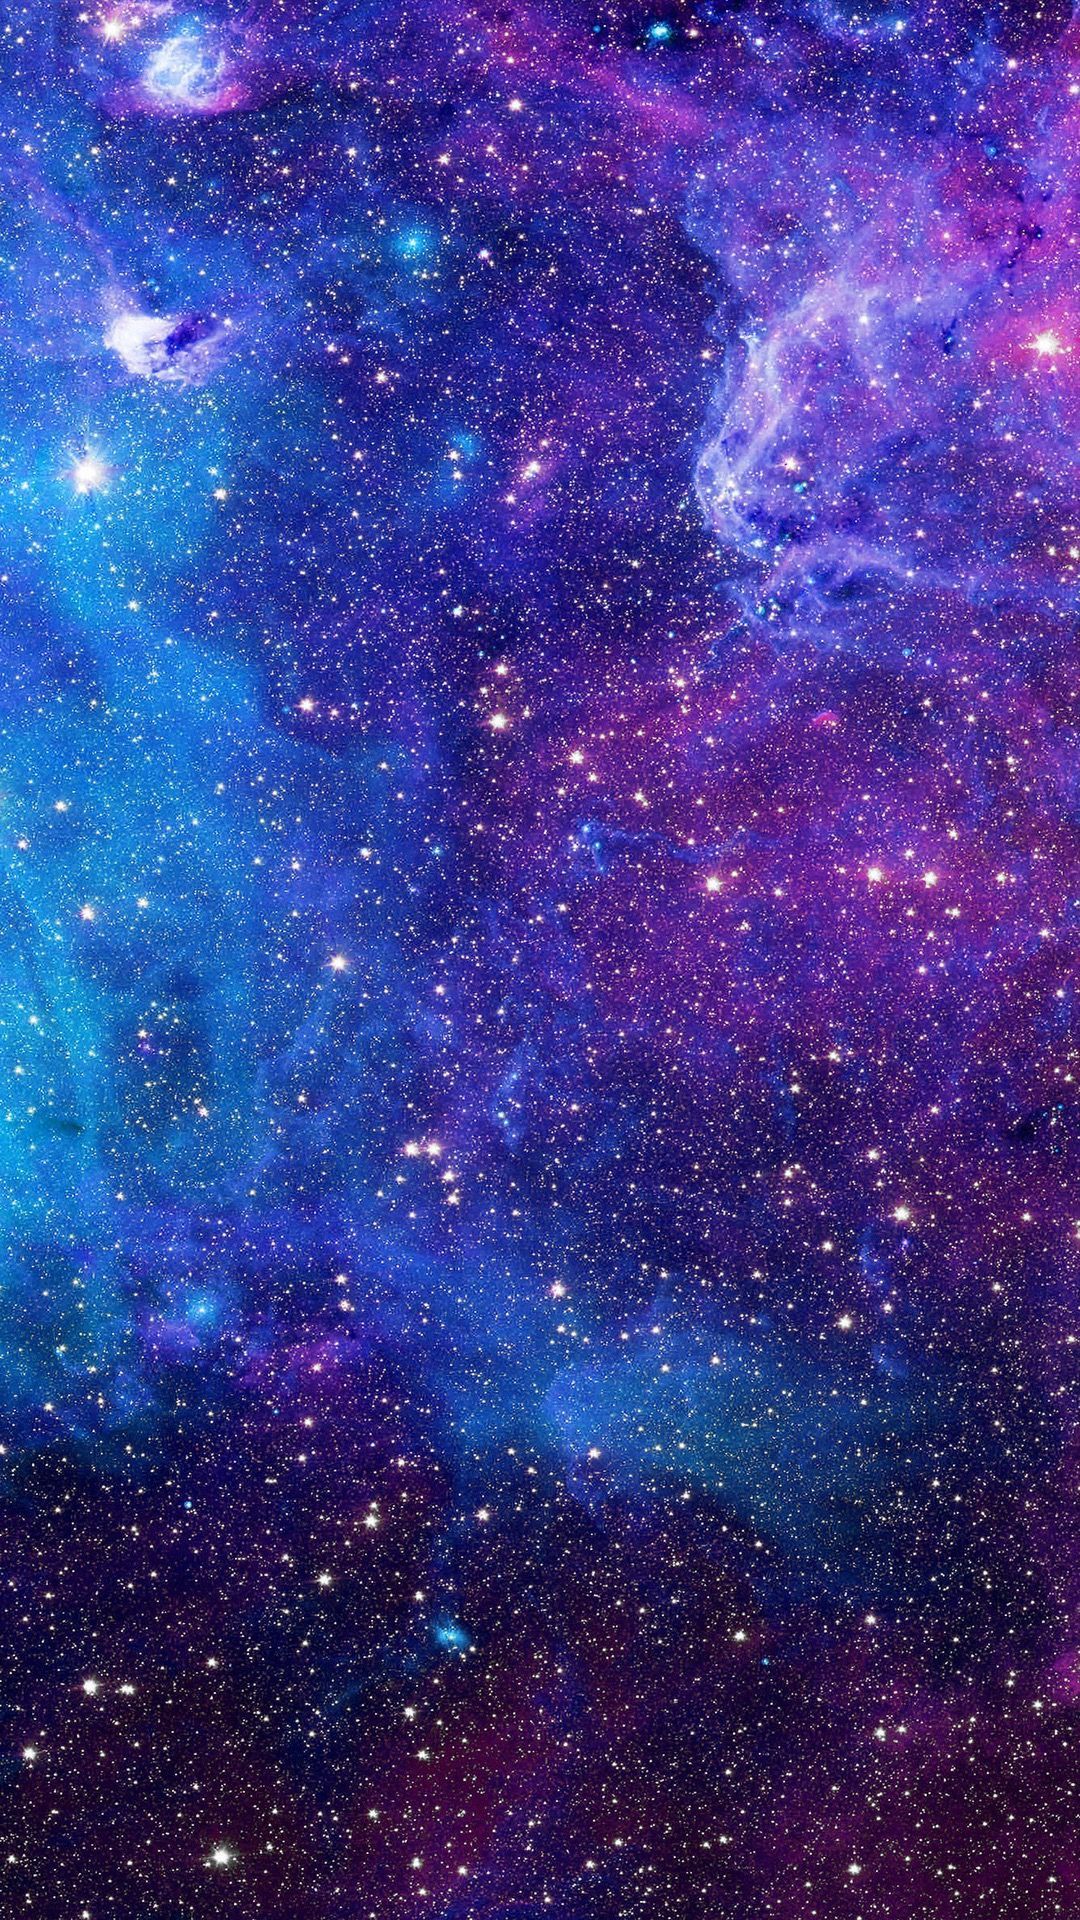 Purple, Nebula, Blue, Violet, Outer space, Astronomical object. Galaxies wallpaper, Blue wallpaper iphone, Galaxy wallpaper